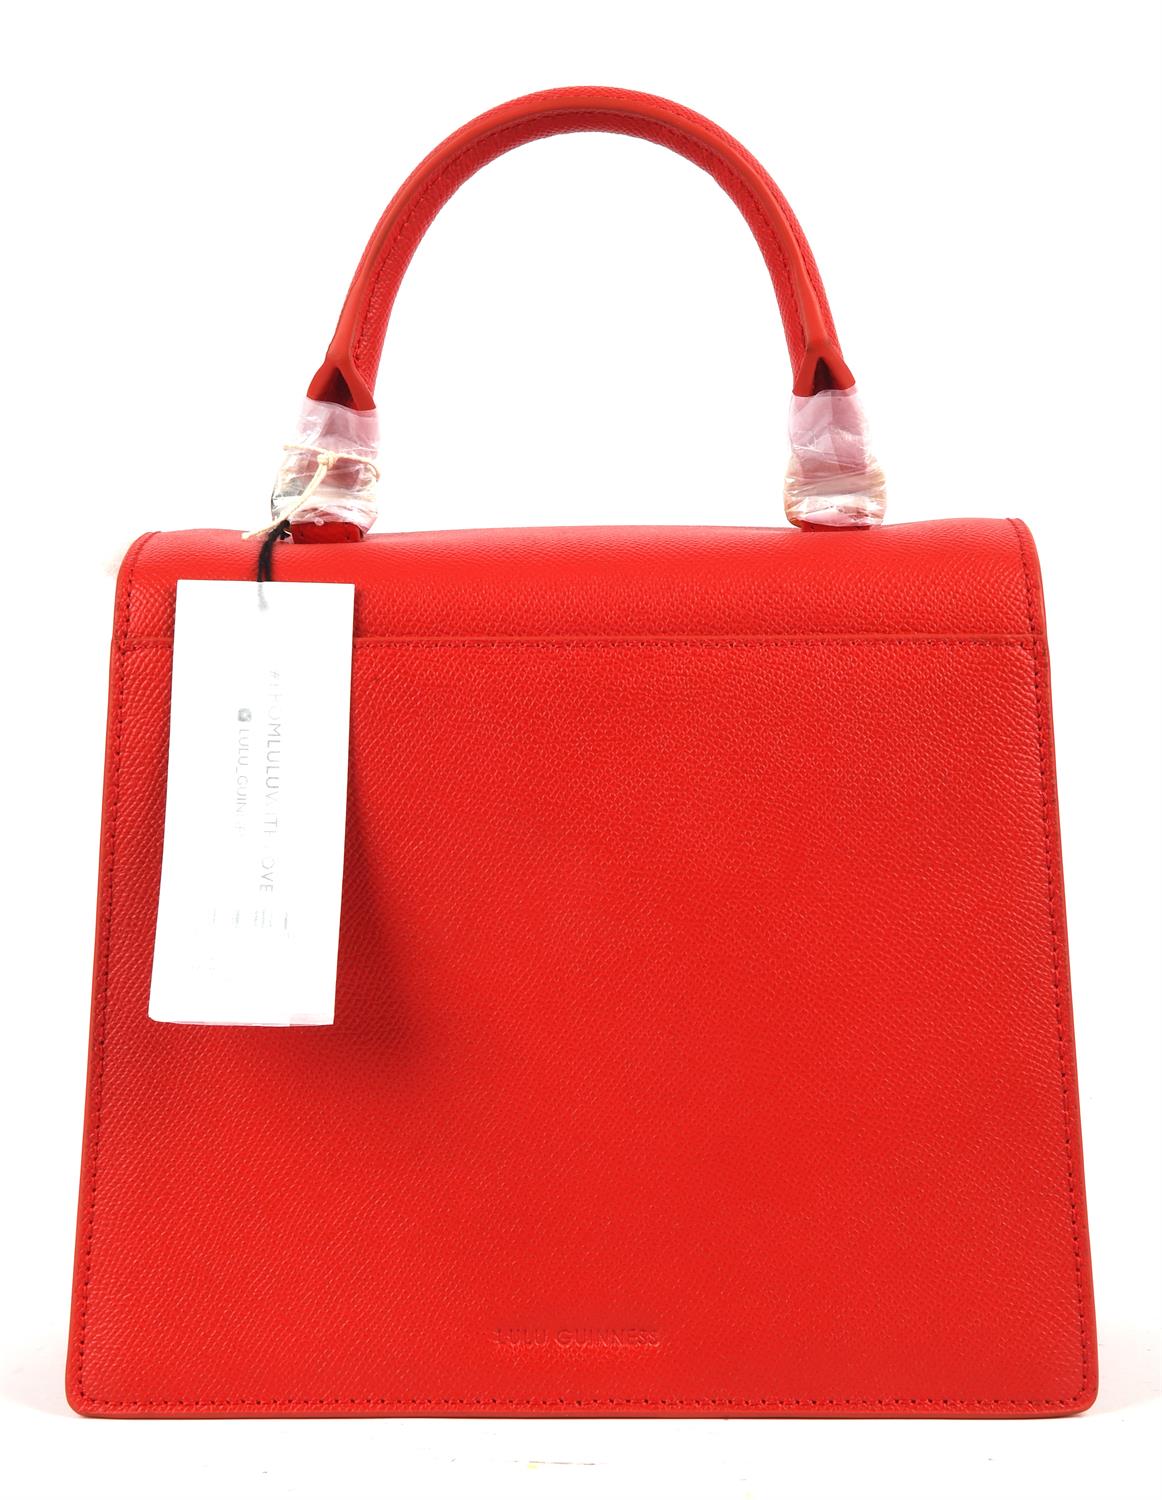 LULU GUINNESS lipstick red leather and suede framed handbag with long strap, dust bag and paperwork. - Image 5 of 6